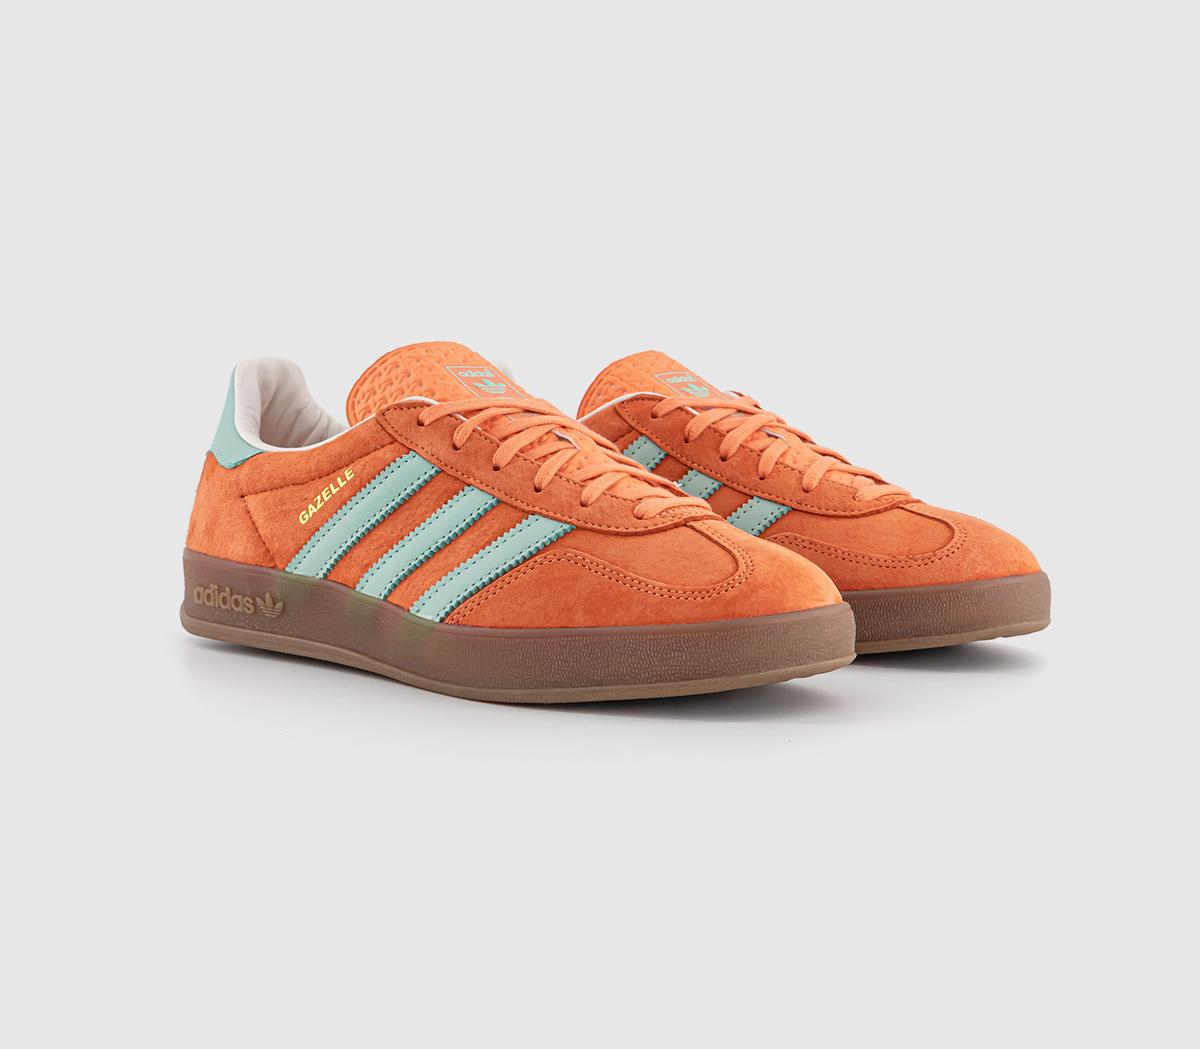 Adidas Gazelle Indoor Trainers Easy Orange Clear Mint Gum Red, 6.5